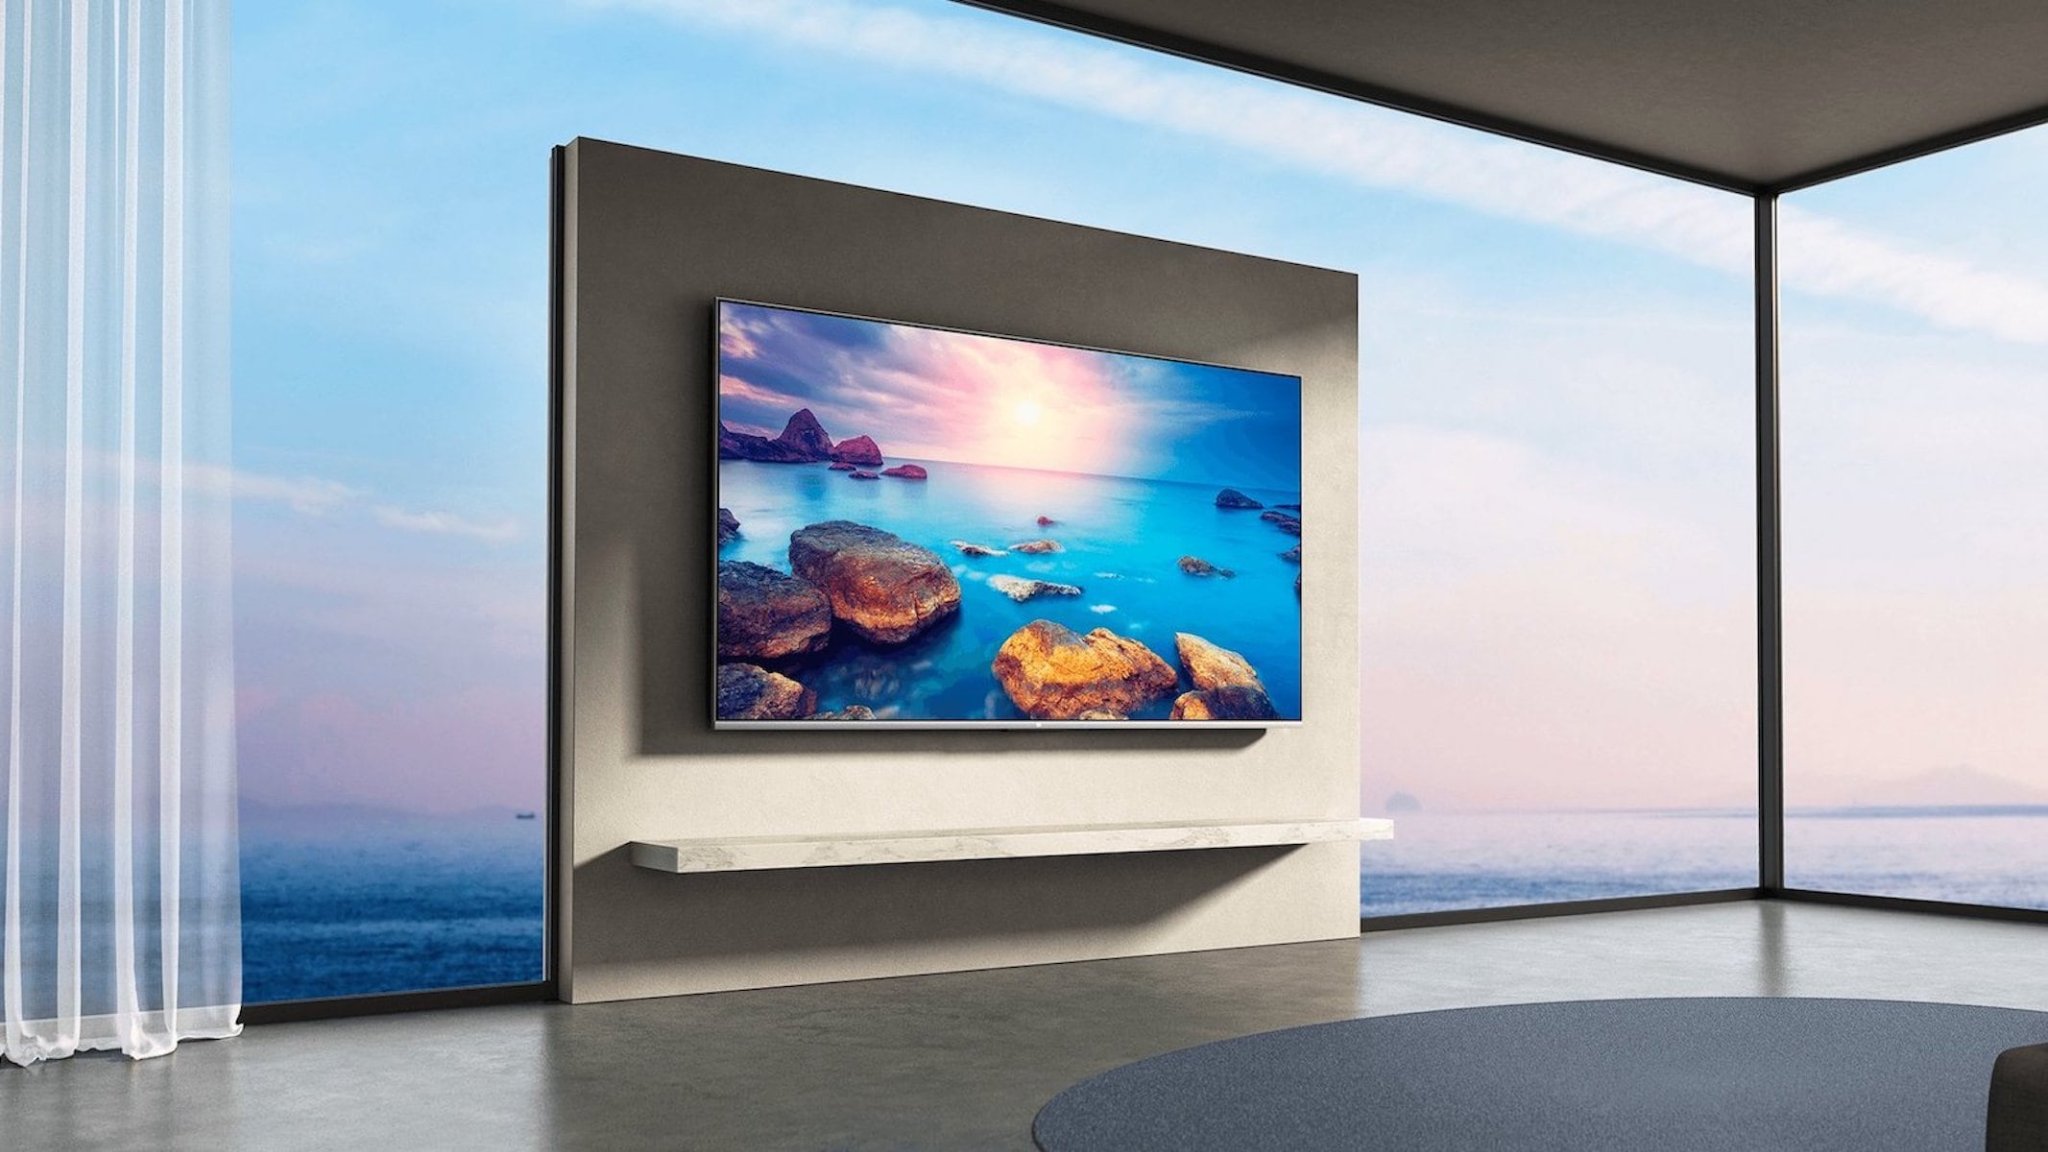 Xiaomi’s 75” 4K TV is a breathtaking smart TV for your home